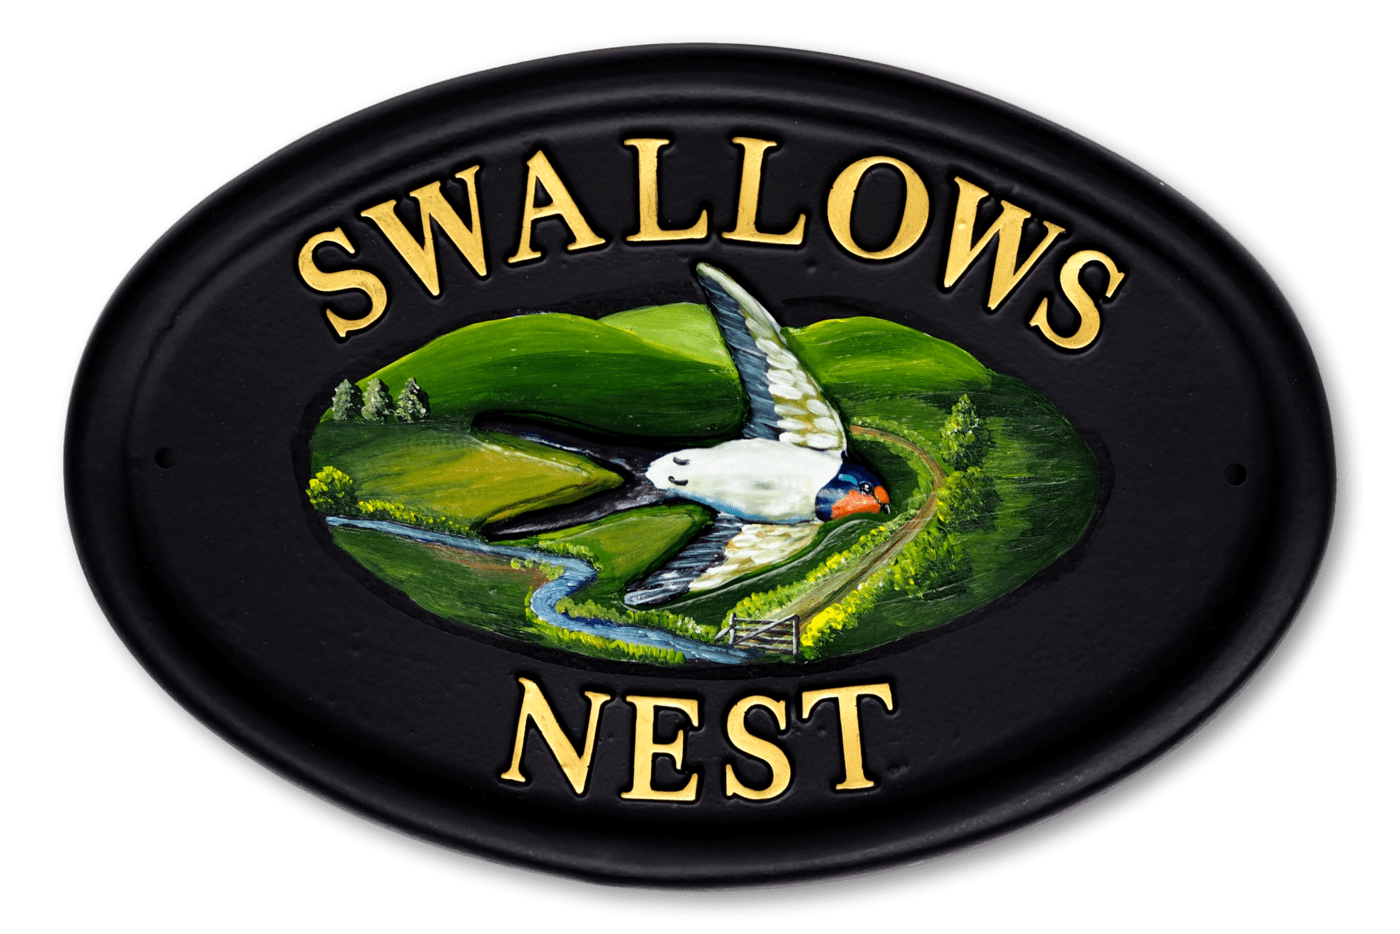 Swallows house sign